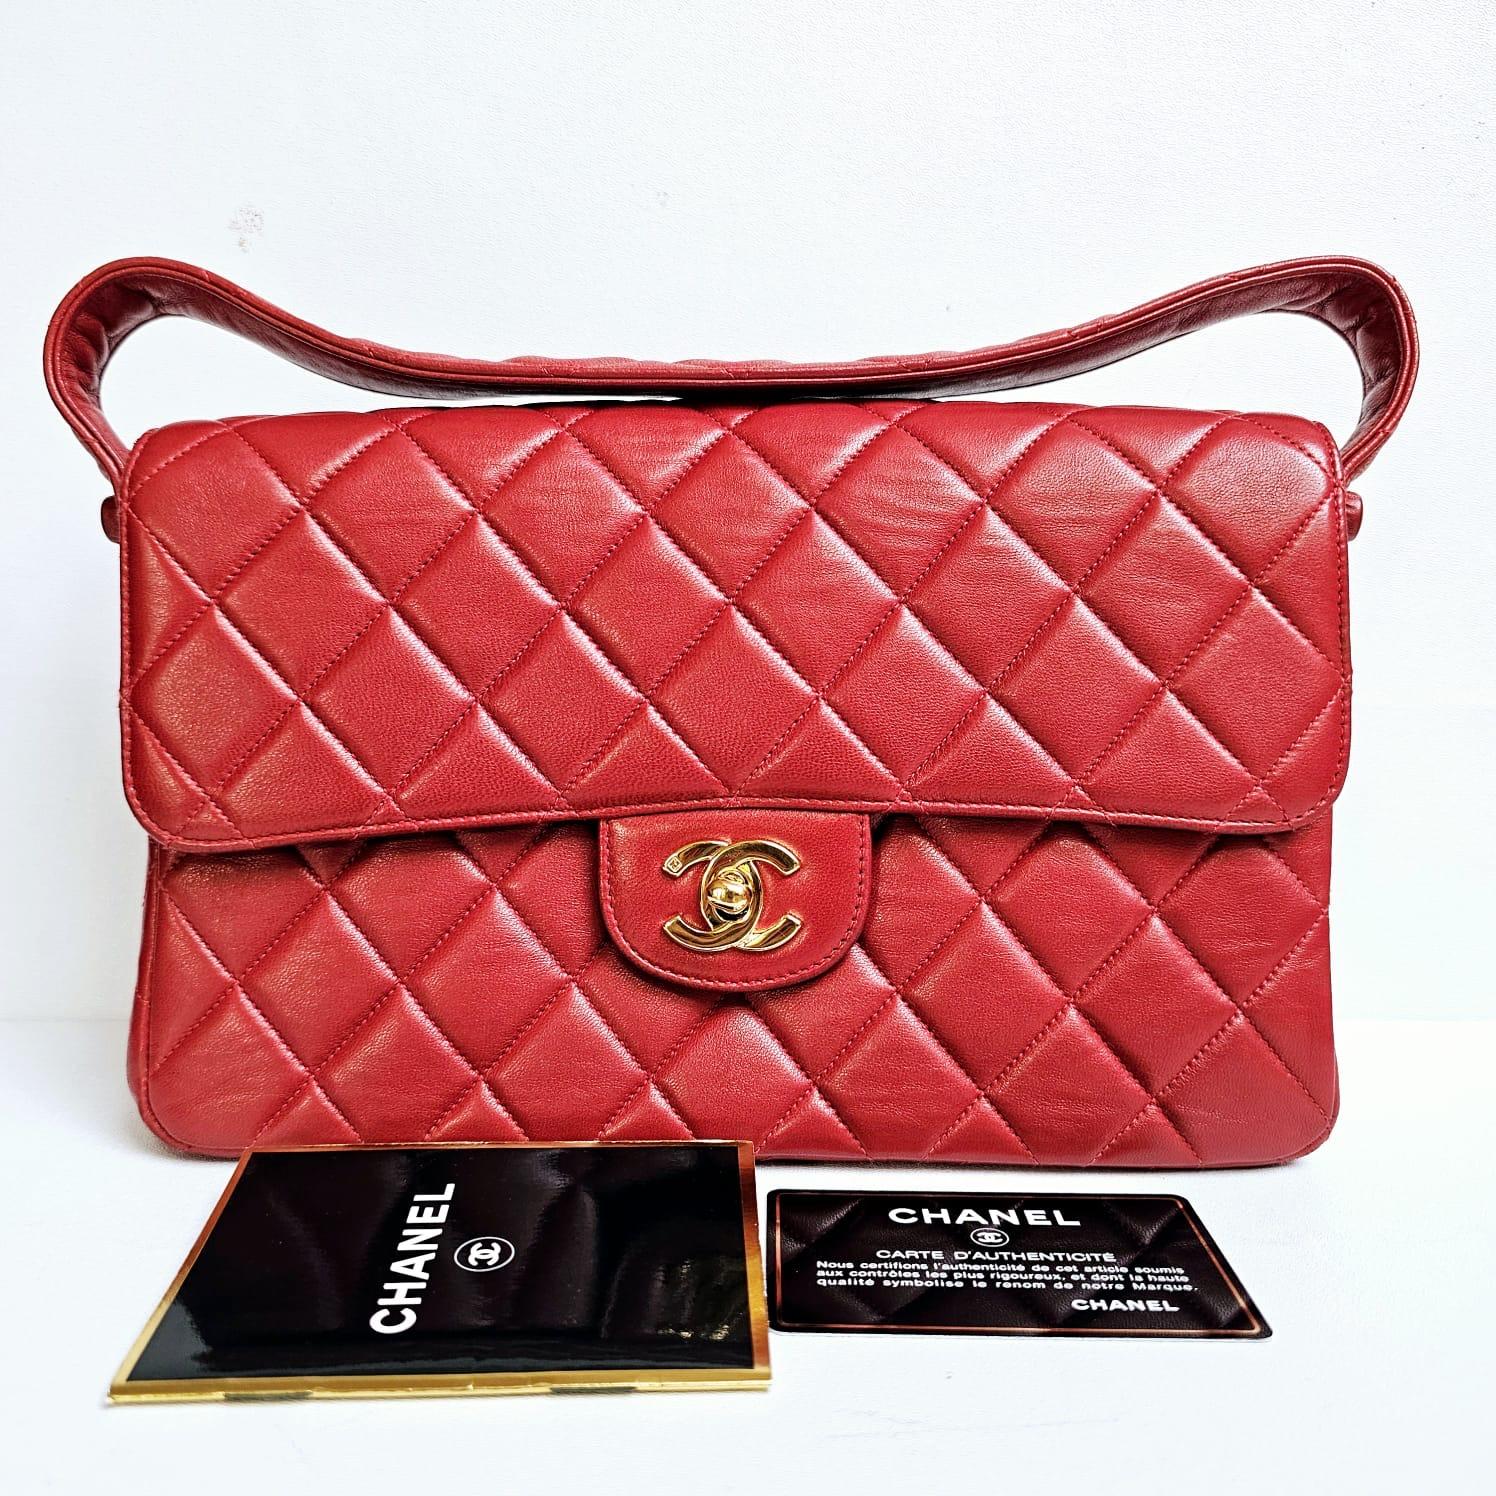 Chanel Vintage Red Lambskin Medium Quilted Double Face Top Handle Bag For Sale 10